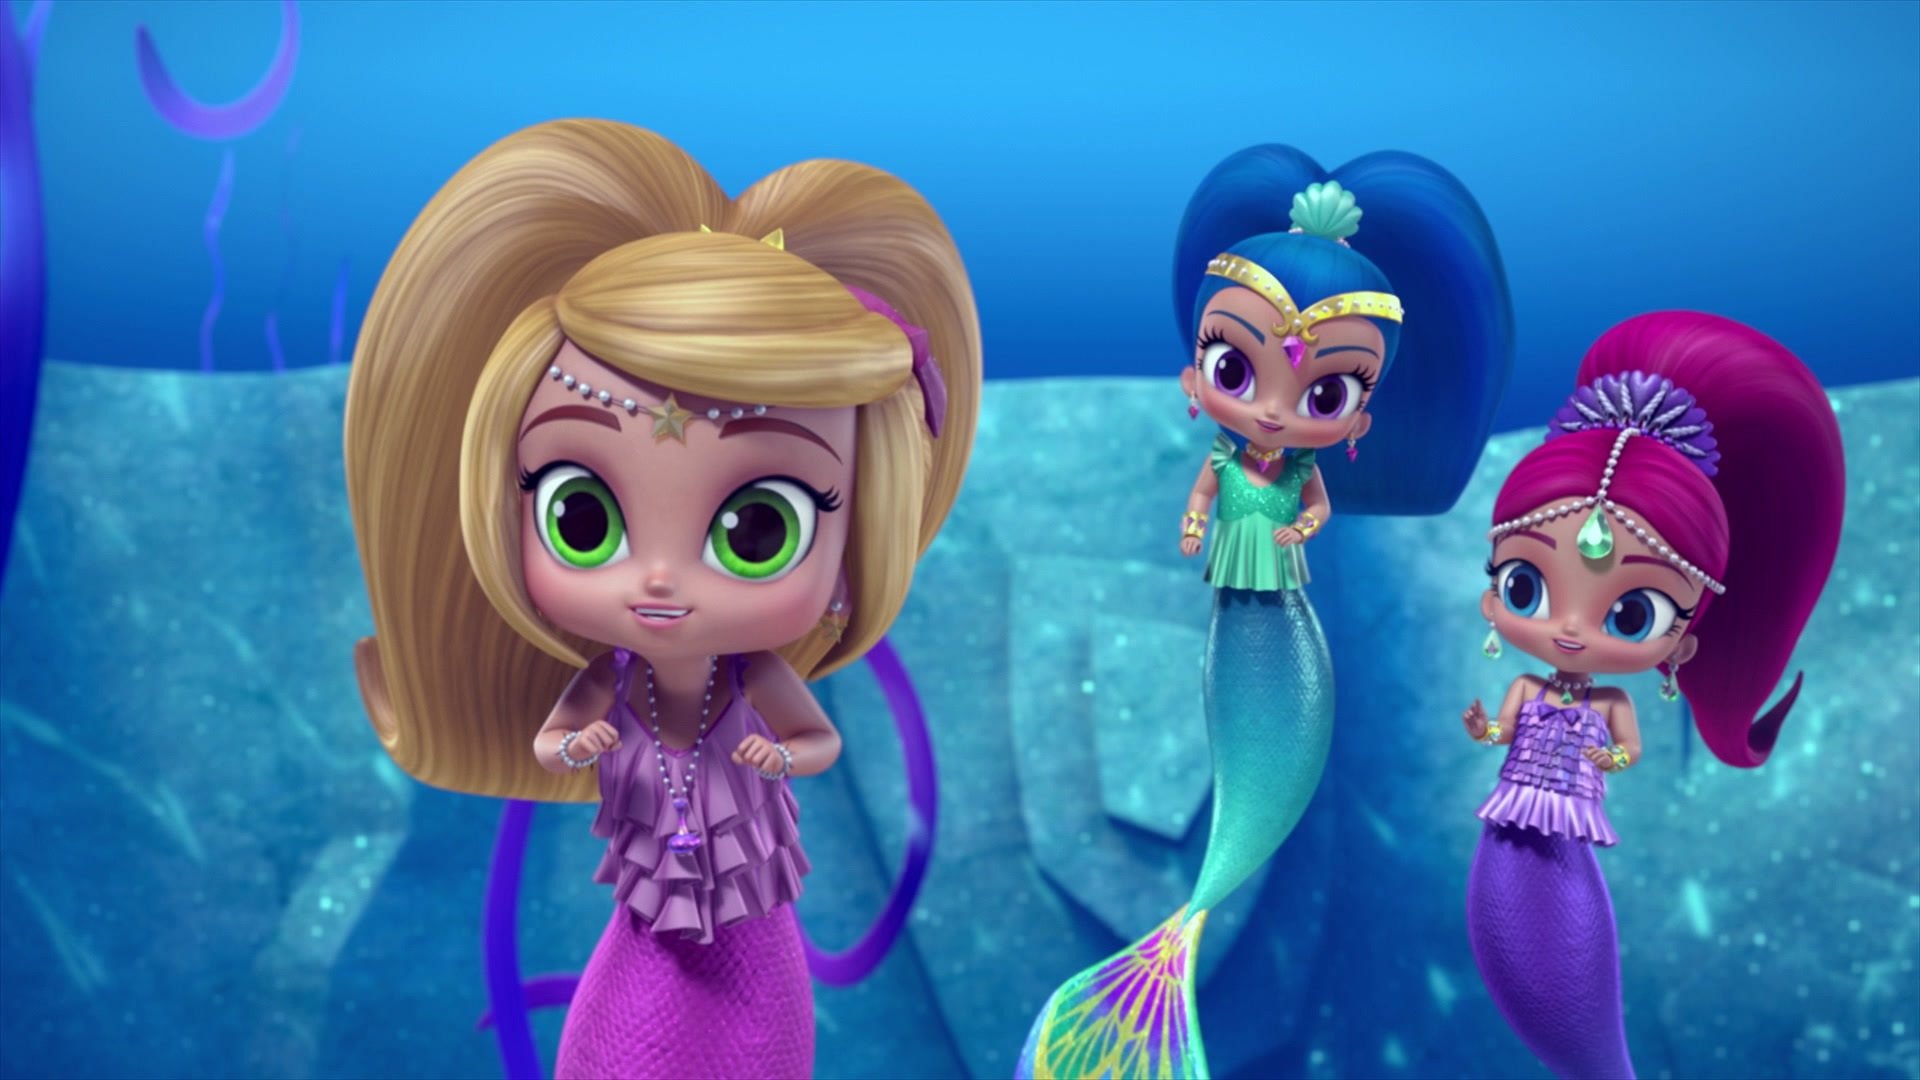 download hd shimmer and shine episodes